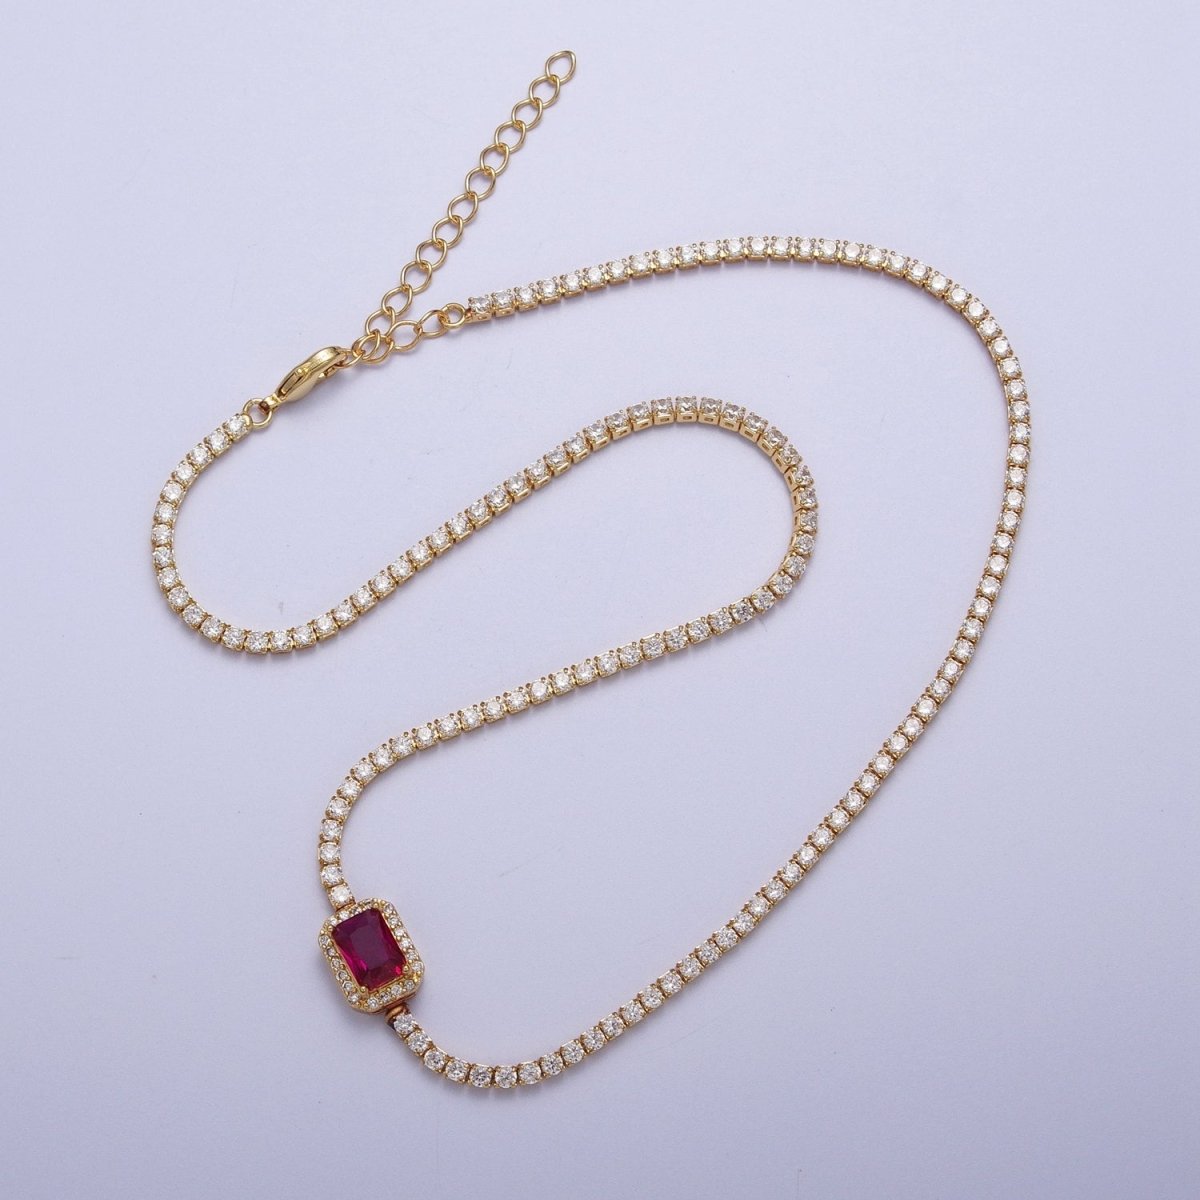 14k Gold Filled Tennis Necklace Chain with Color Emerald Cut Cz Stone for Layering Necklace | WA-1156 to WA-1159 Clearance Pricing - DLUXCA